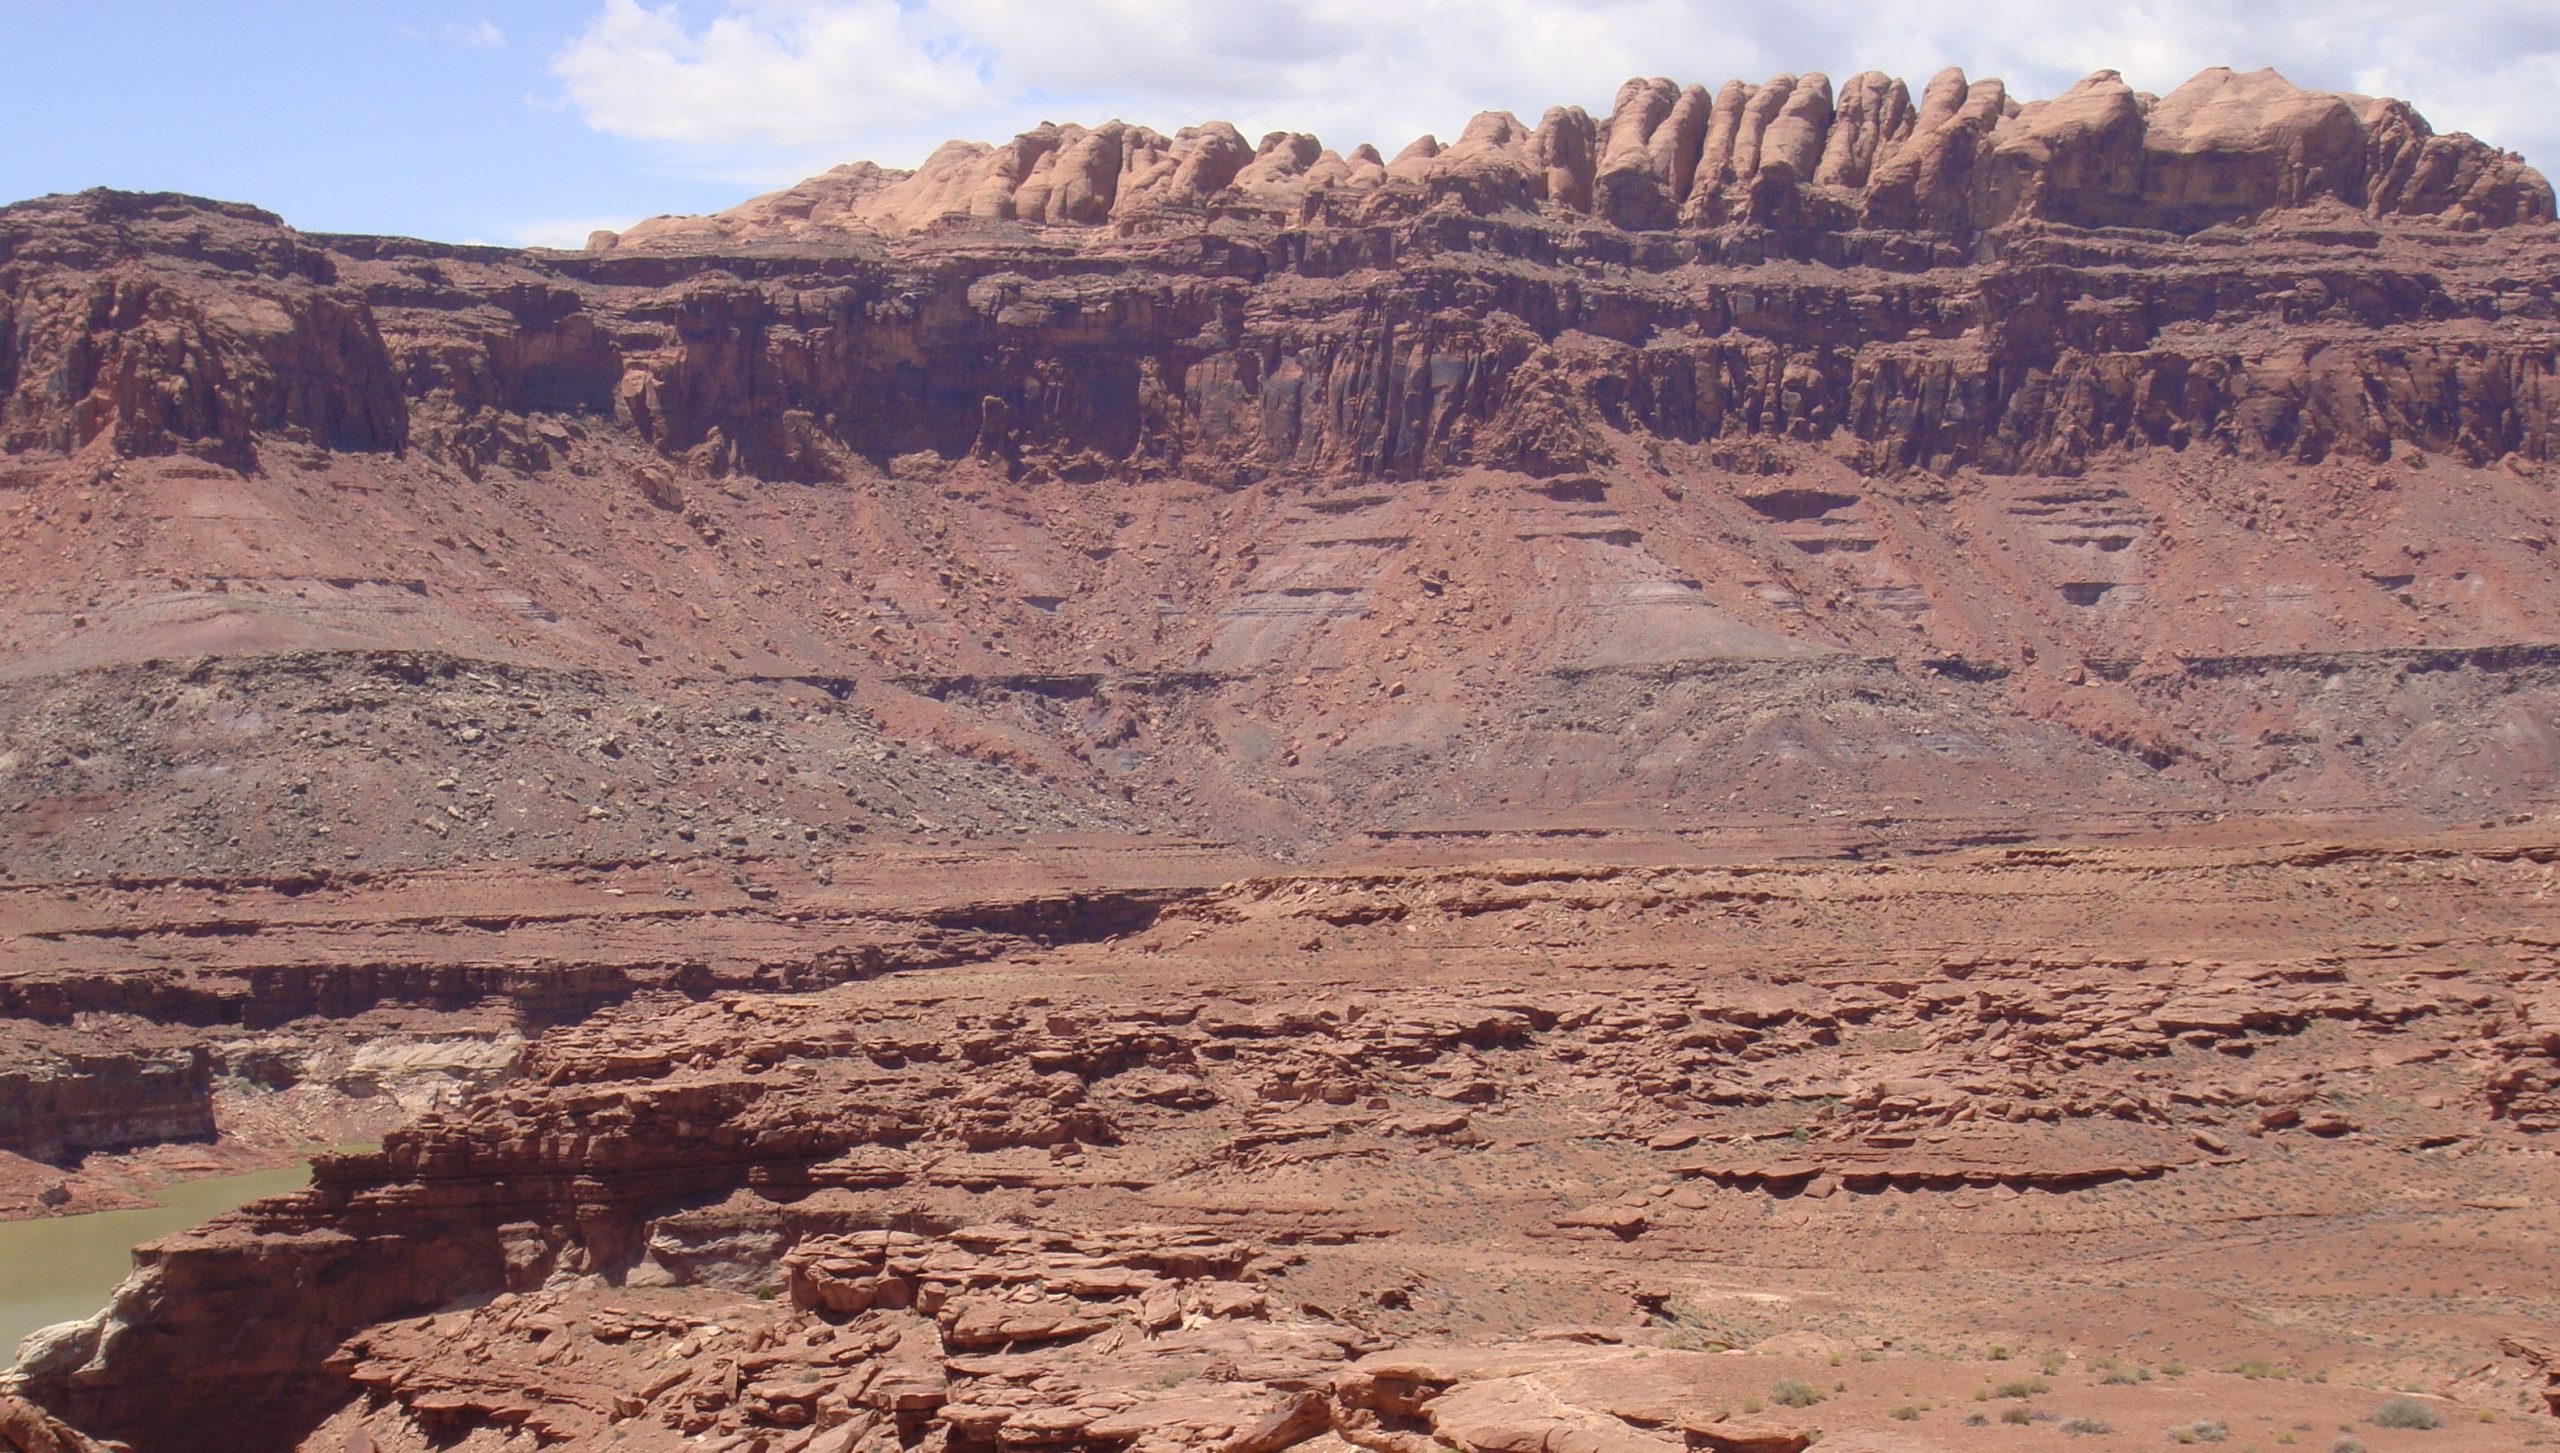 Landscape of flat layered reddish brown rocks in the foreground; in the background are slopes of gray and red rock fragments leading up to vertical reddish brown and tan cliffs above, consisting of flat-lying sedimentary rock layers.